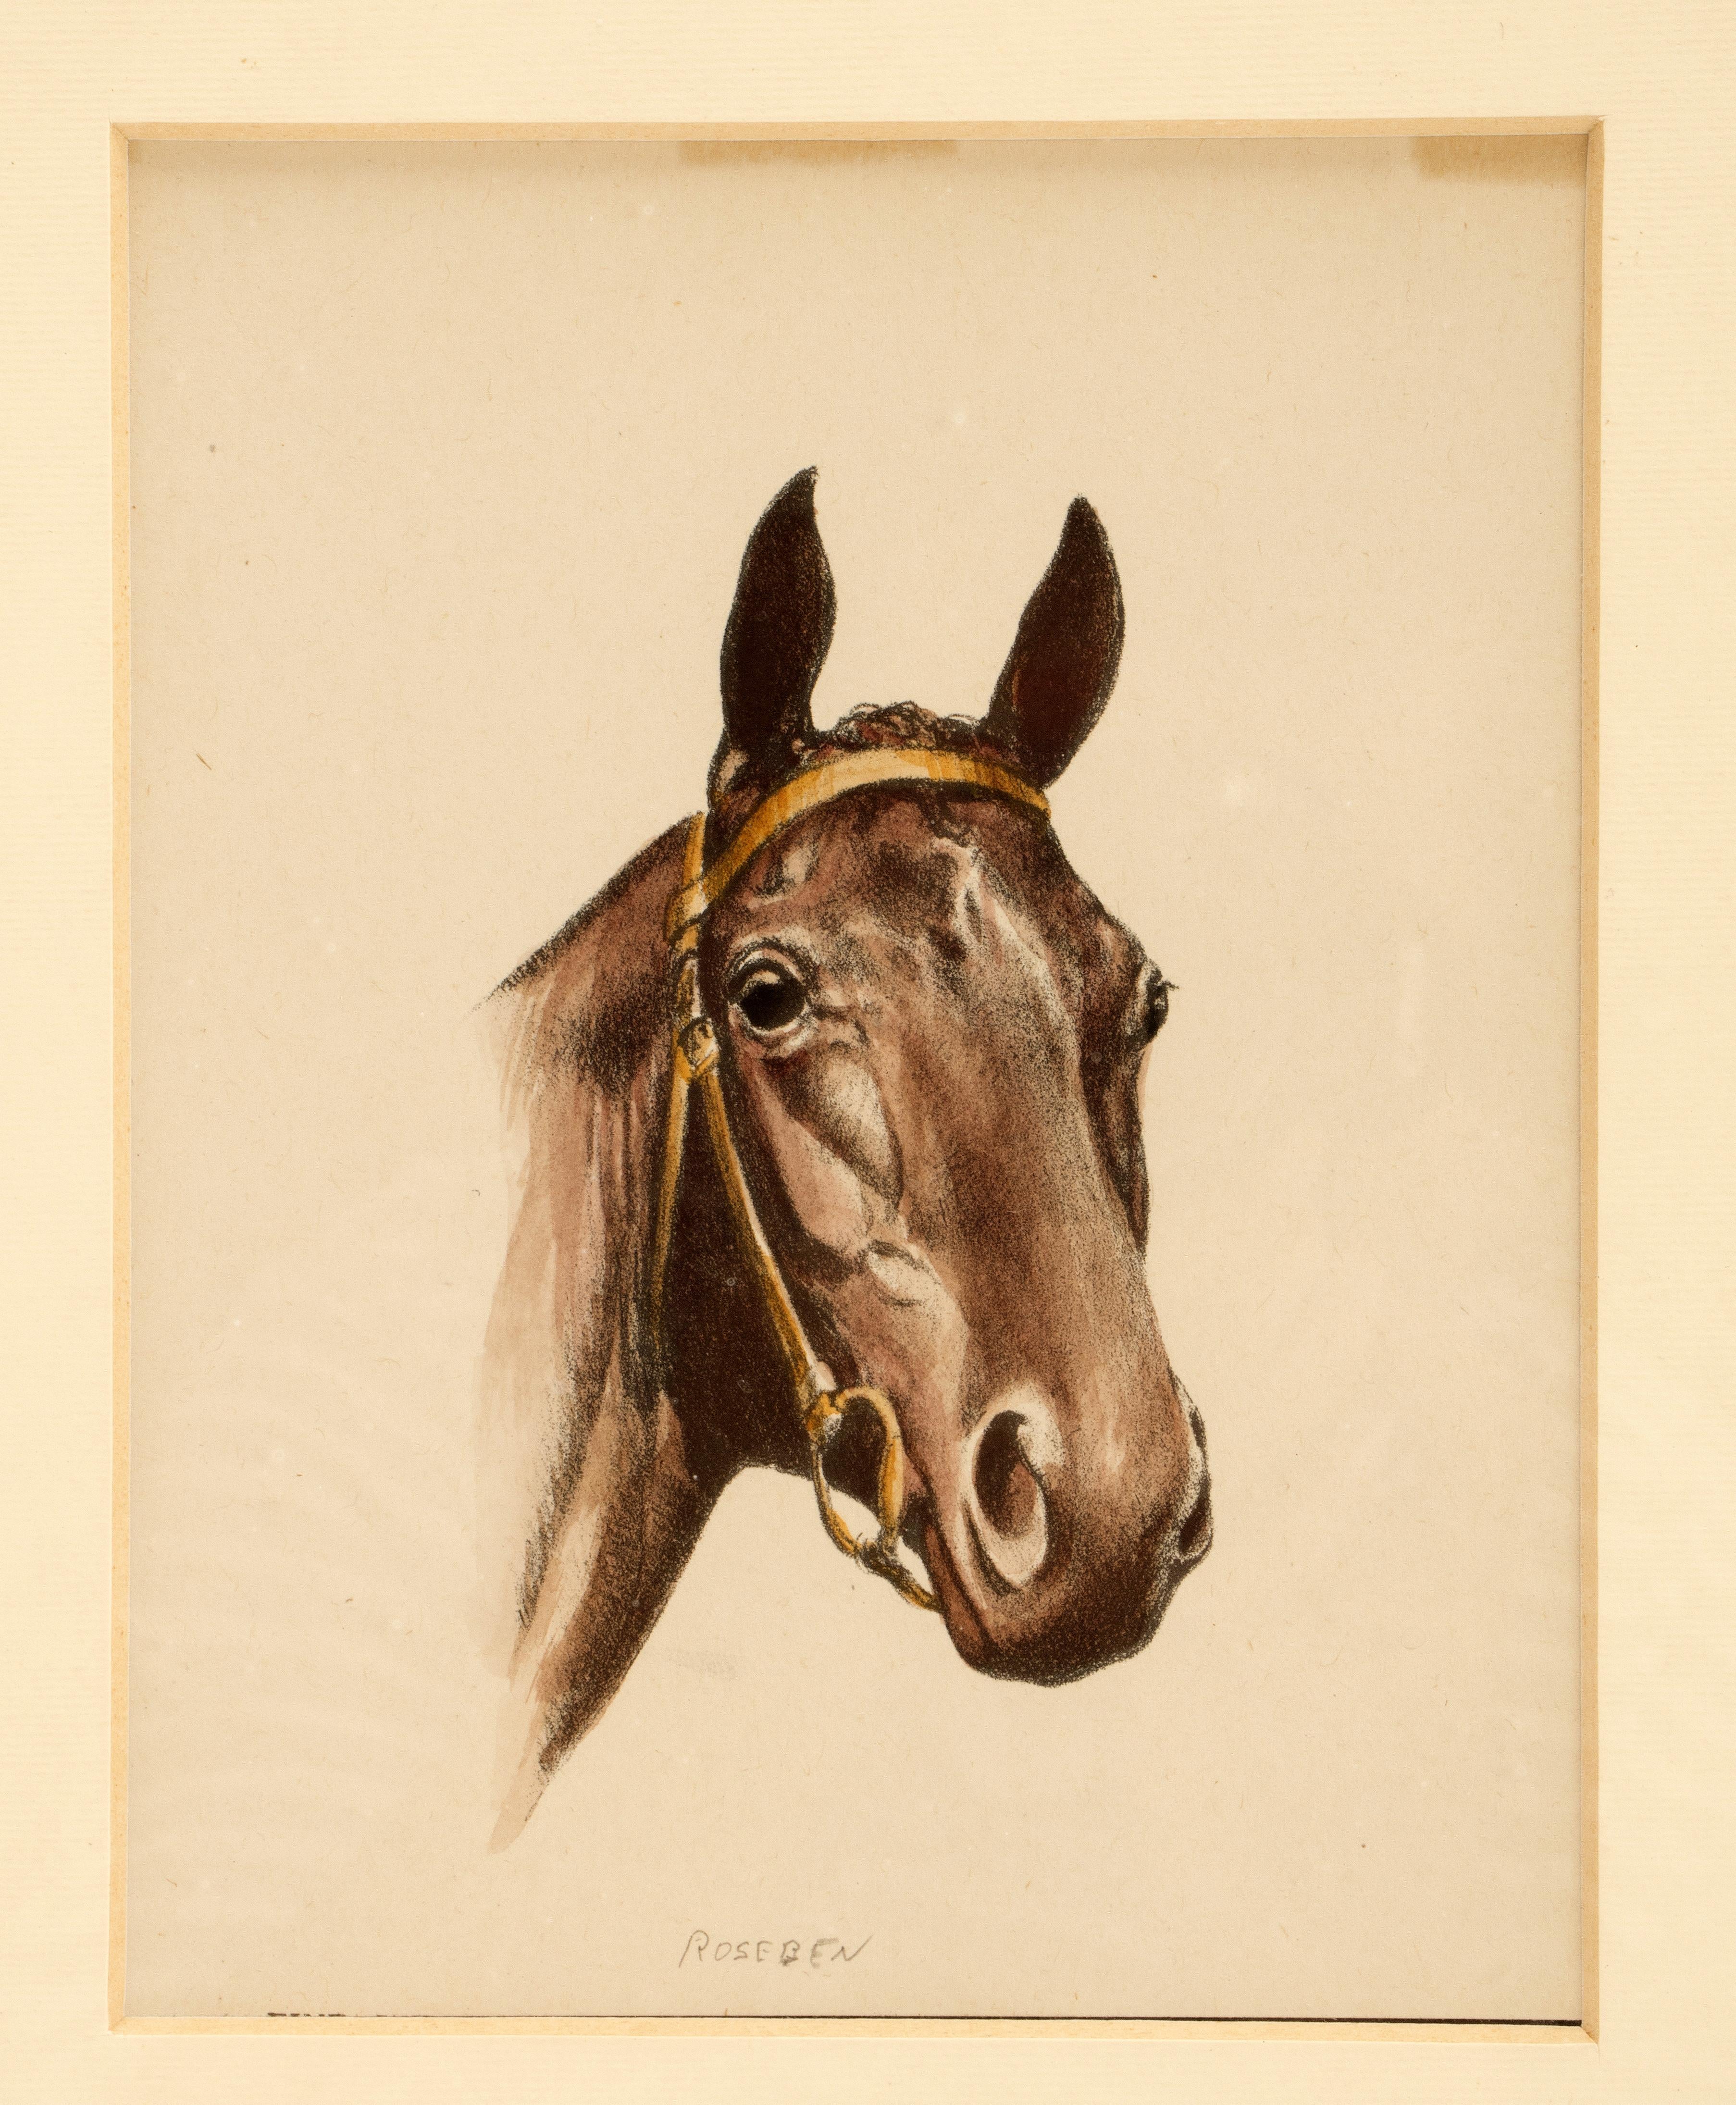 A color lithograph, depicting a horse head Rosebend. Signed C. W. Anderson. Solid cherry wood frame, polished and beeswaxed. Usa circa 1950.